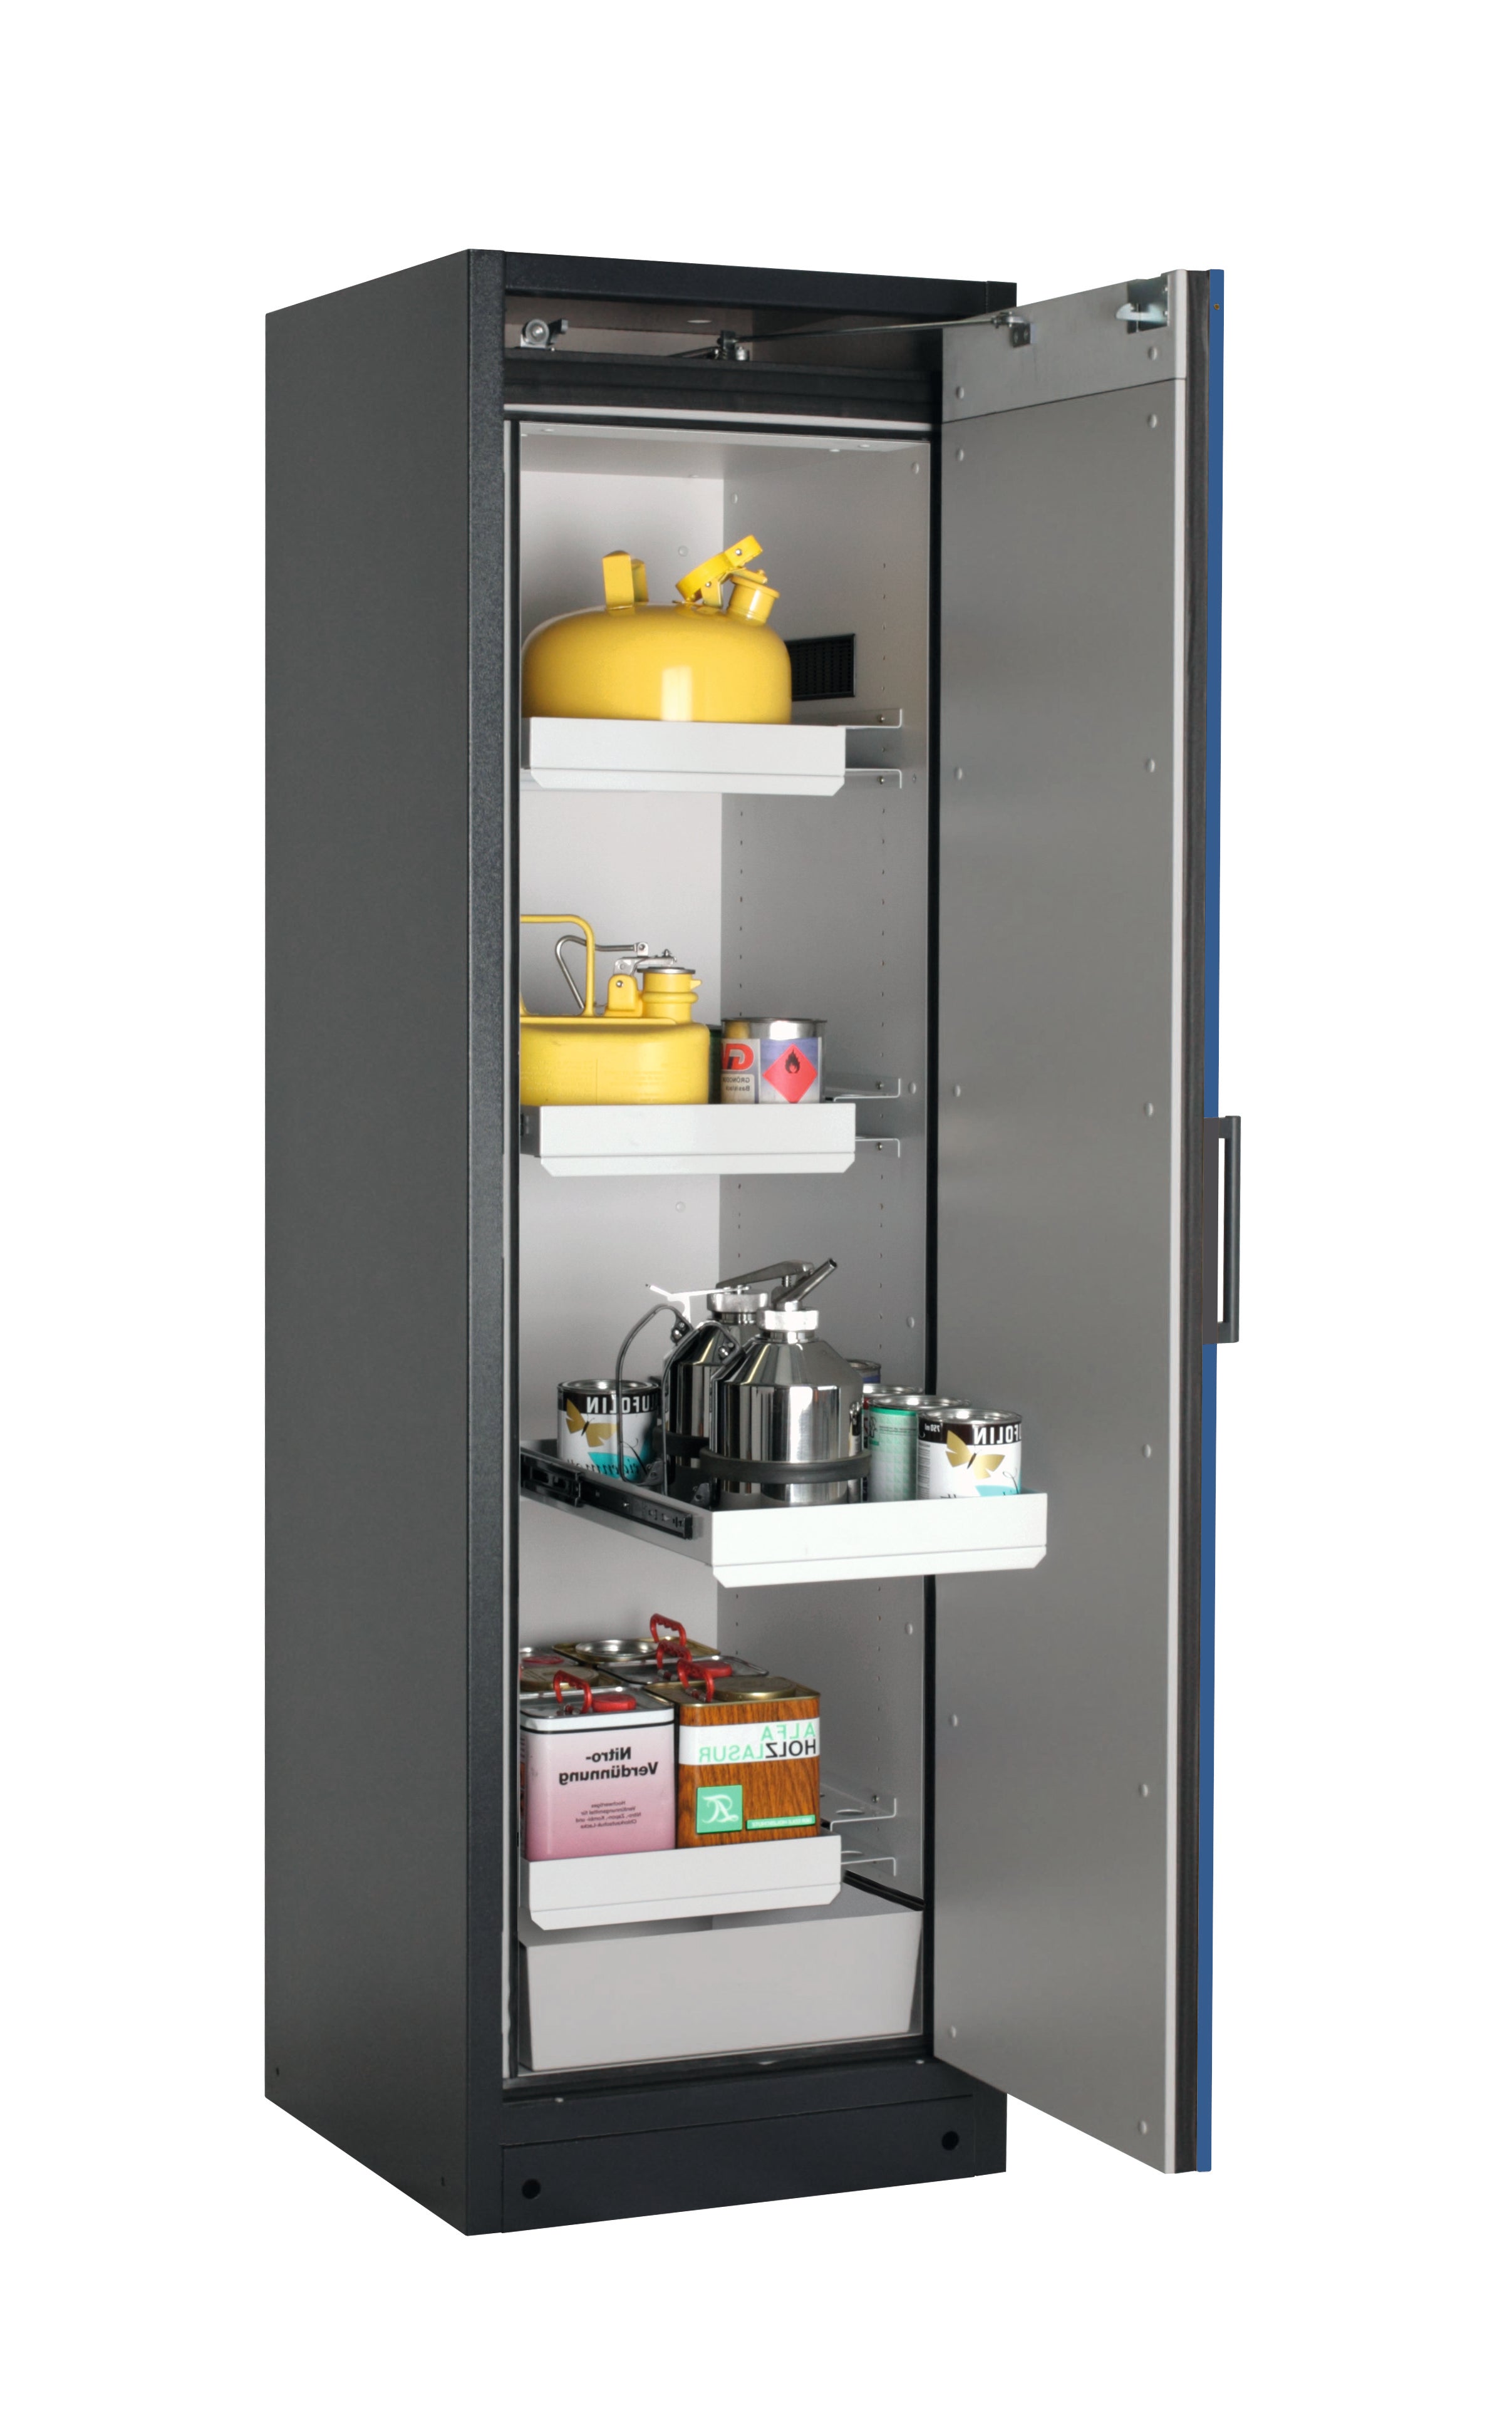 Type 90 safety storage cabinet Q-CLASSIC-90 model Q90.195.060.R in gentian blue RAL 5010 with 3x drawer (standard) (sheet steel),